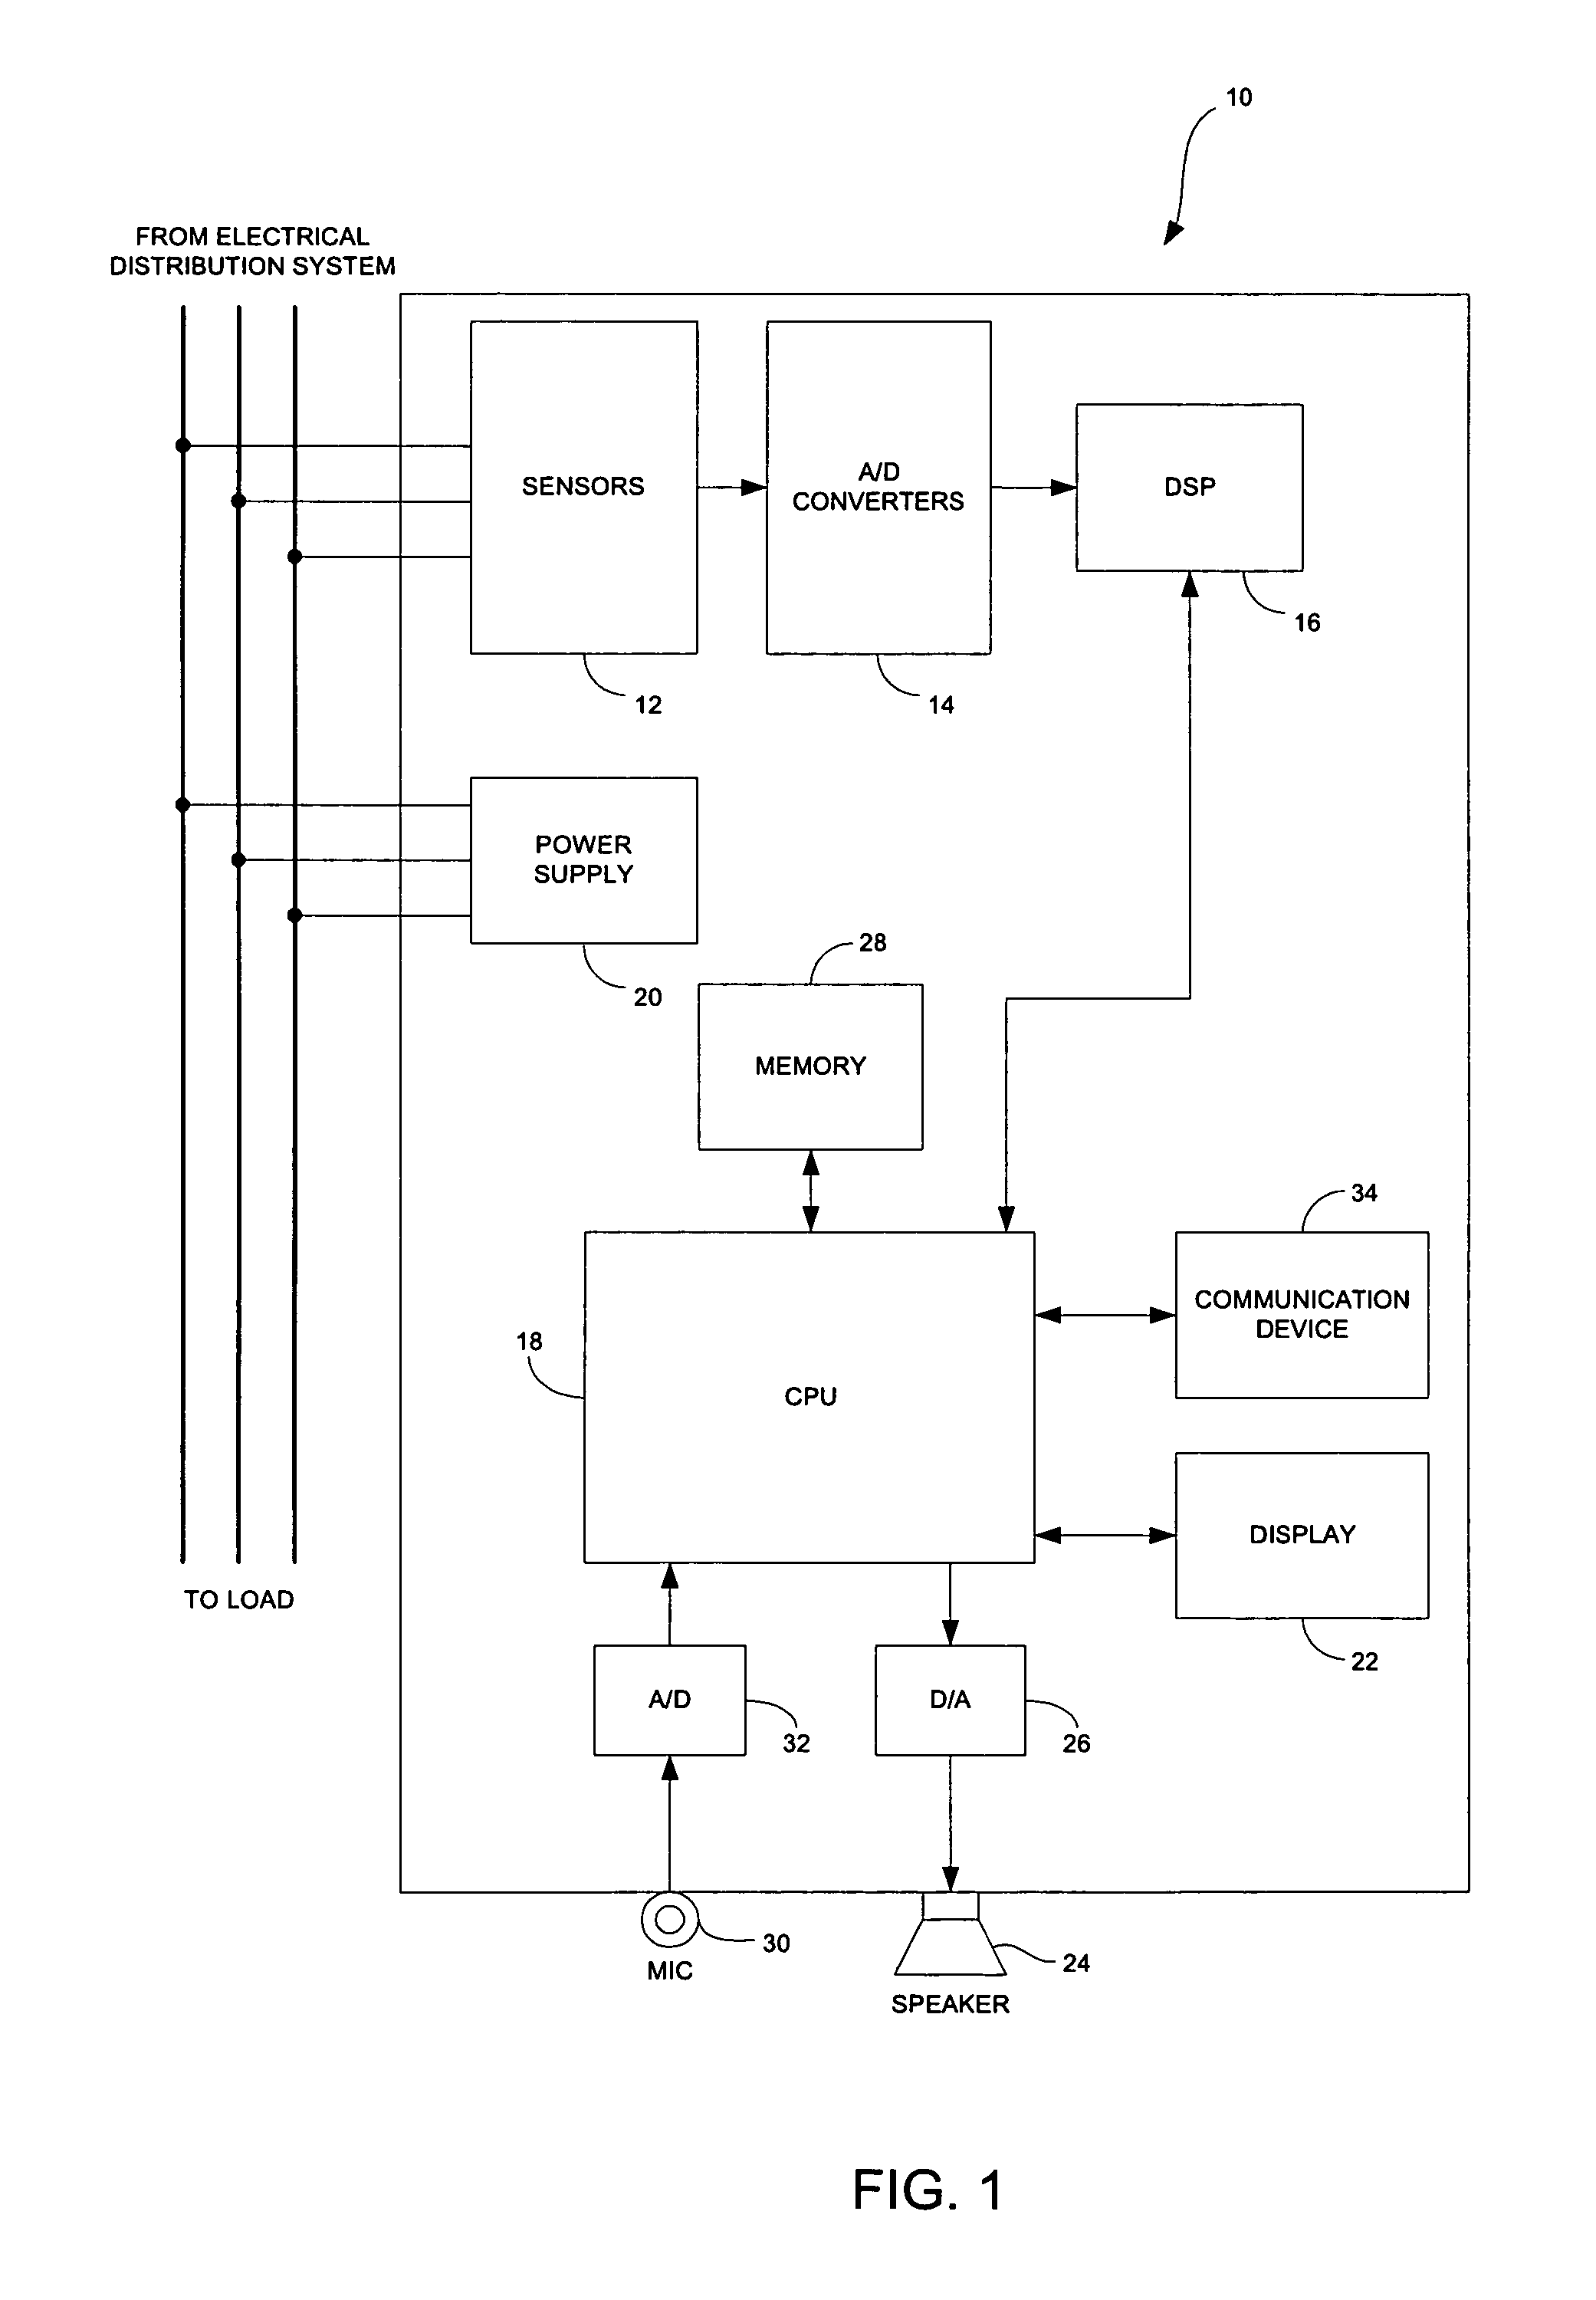 Intelligent electronic device having audible and visual interface